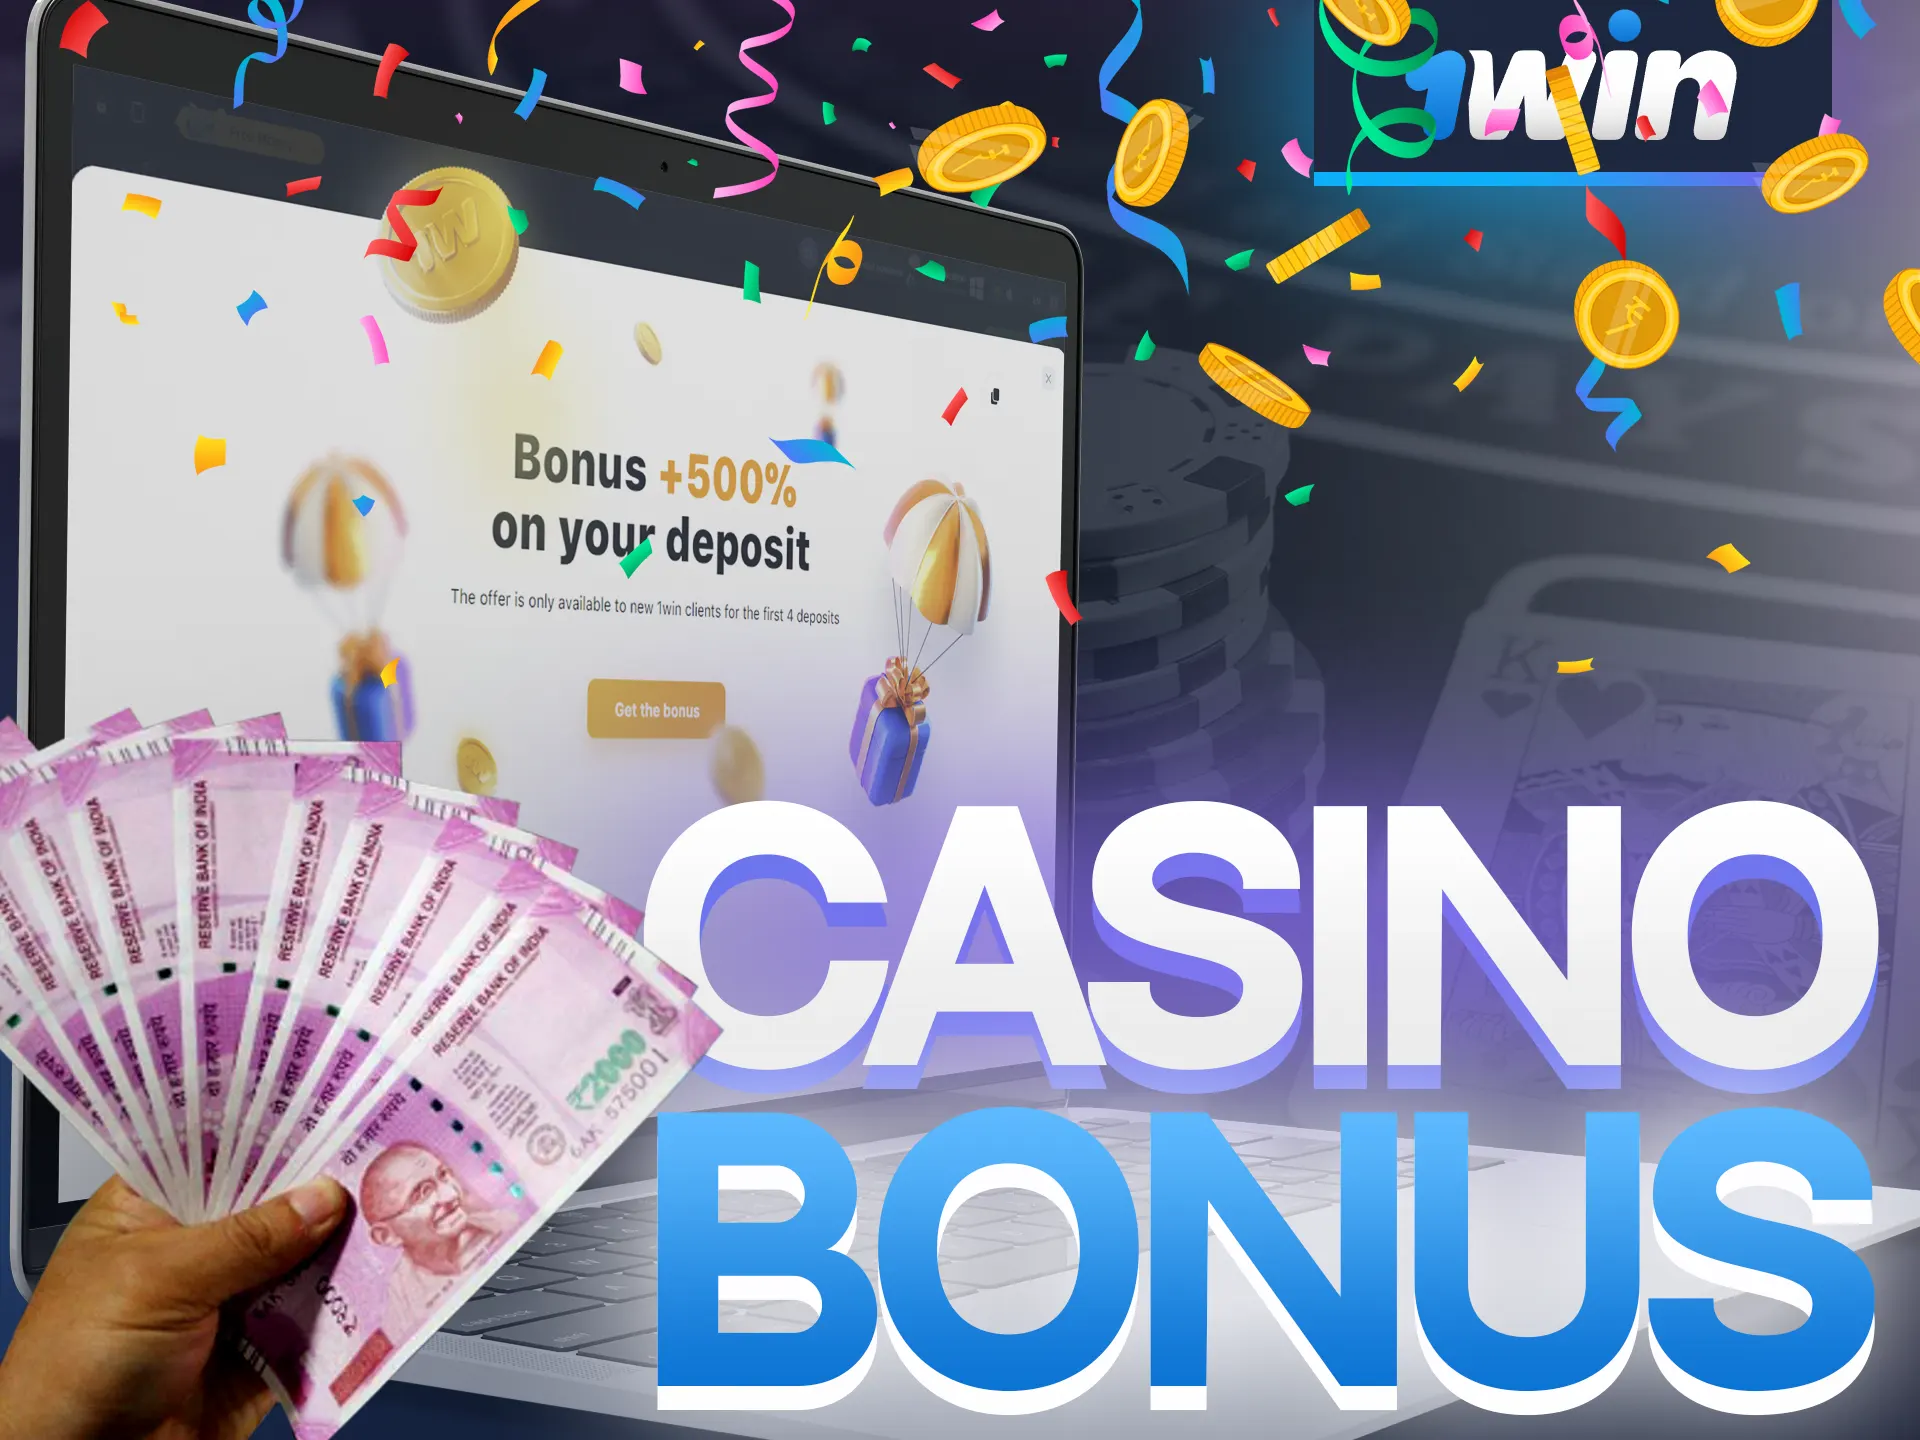 Get the best bonuses for casino games from 1Win.